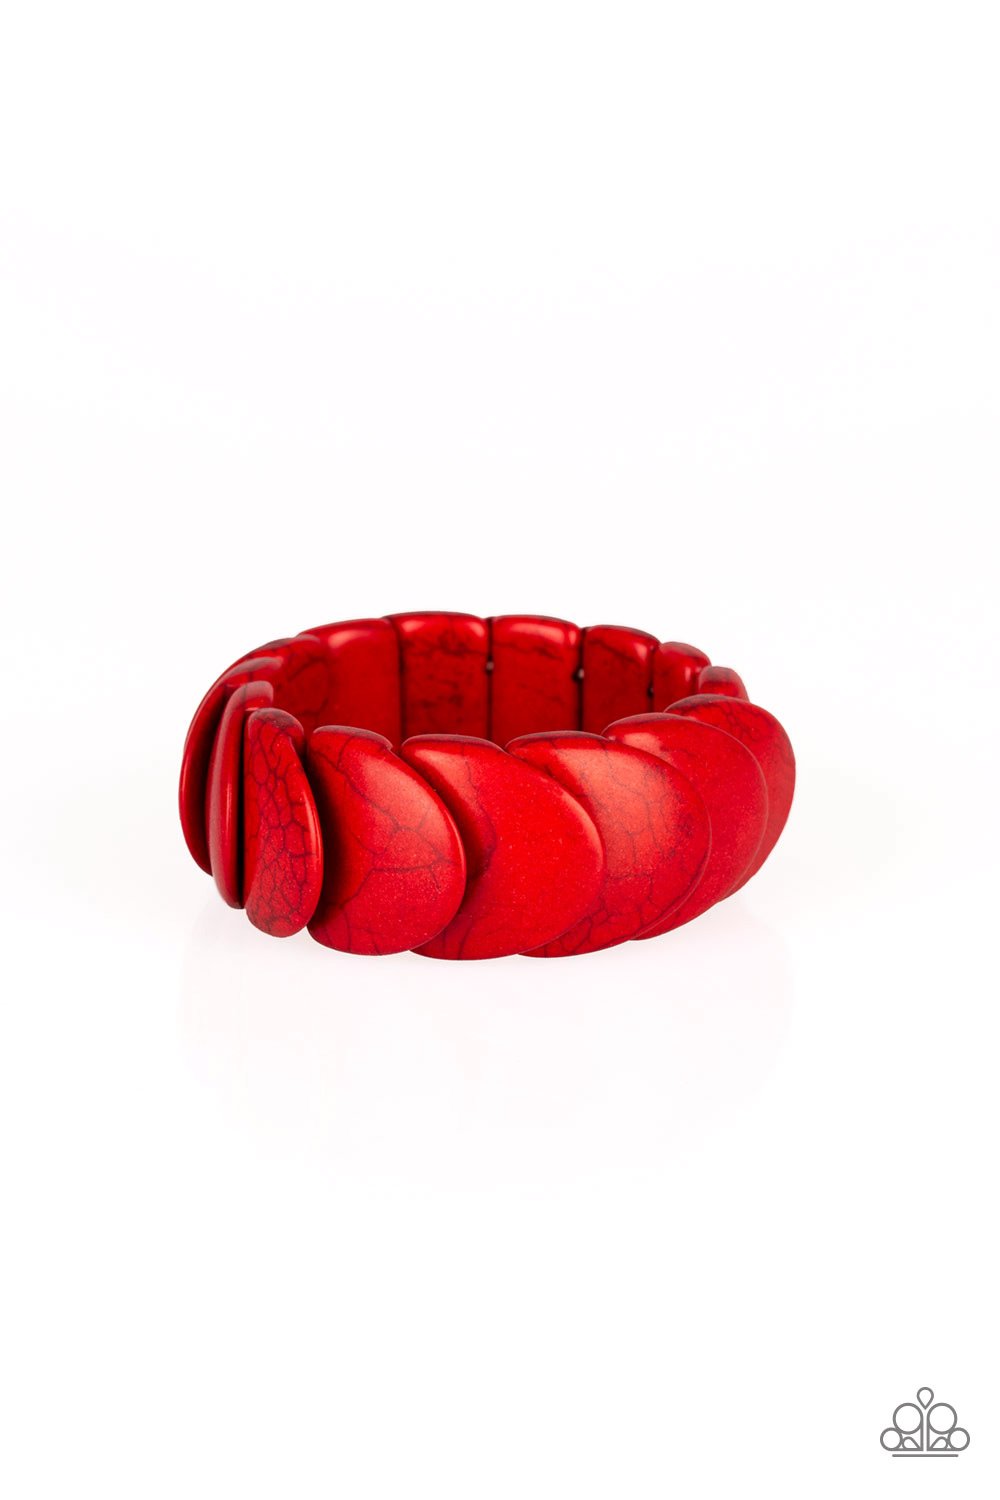 Paparazzi Accessories Nomadic Nature - Red Bracelets  - Lady T Accessories